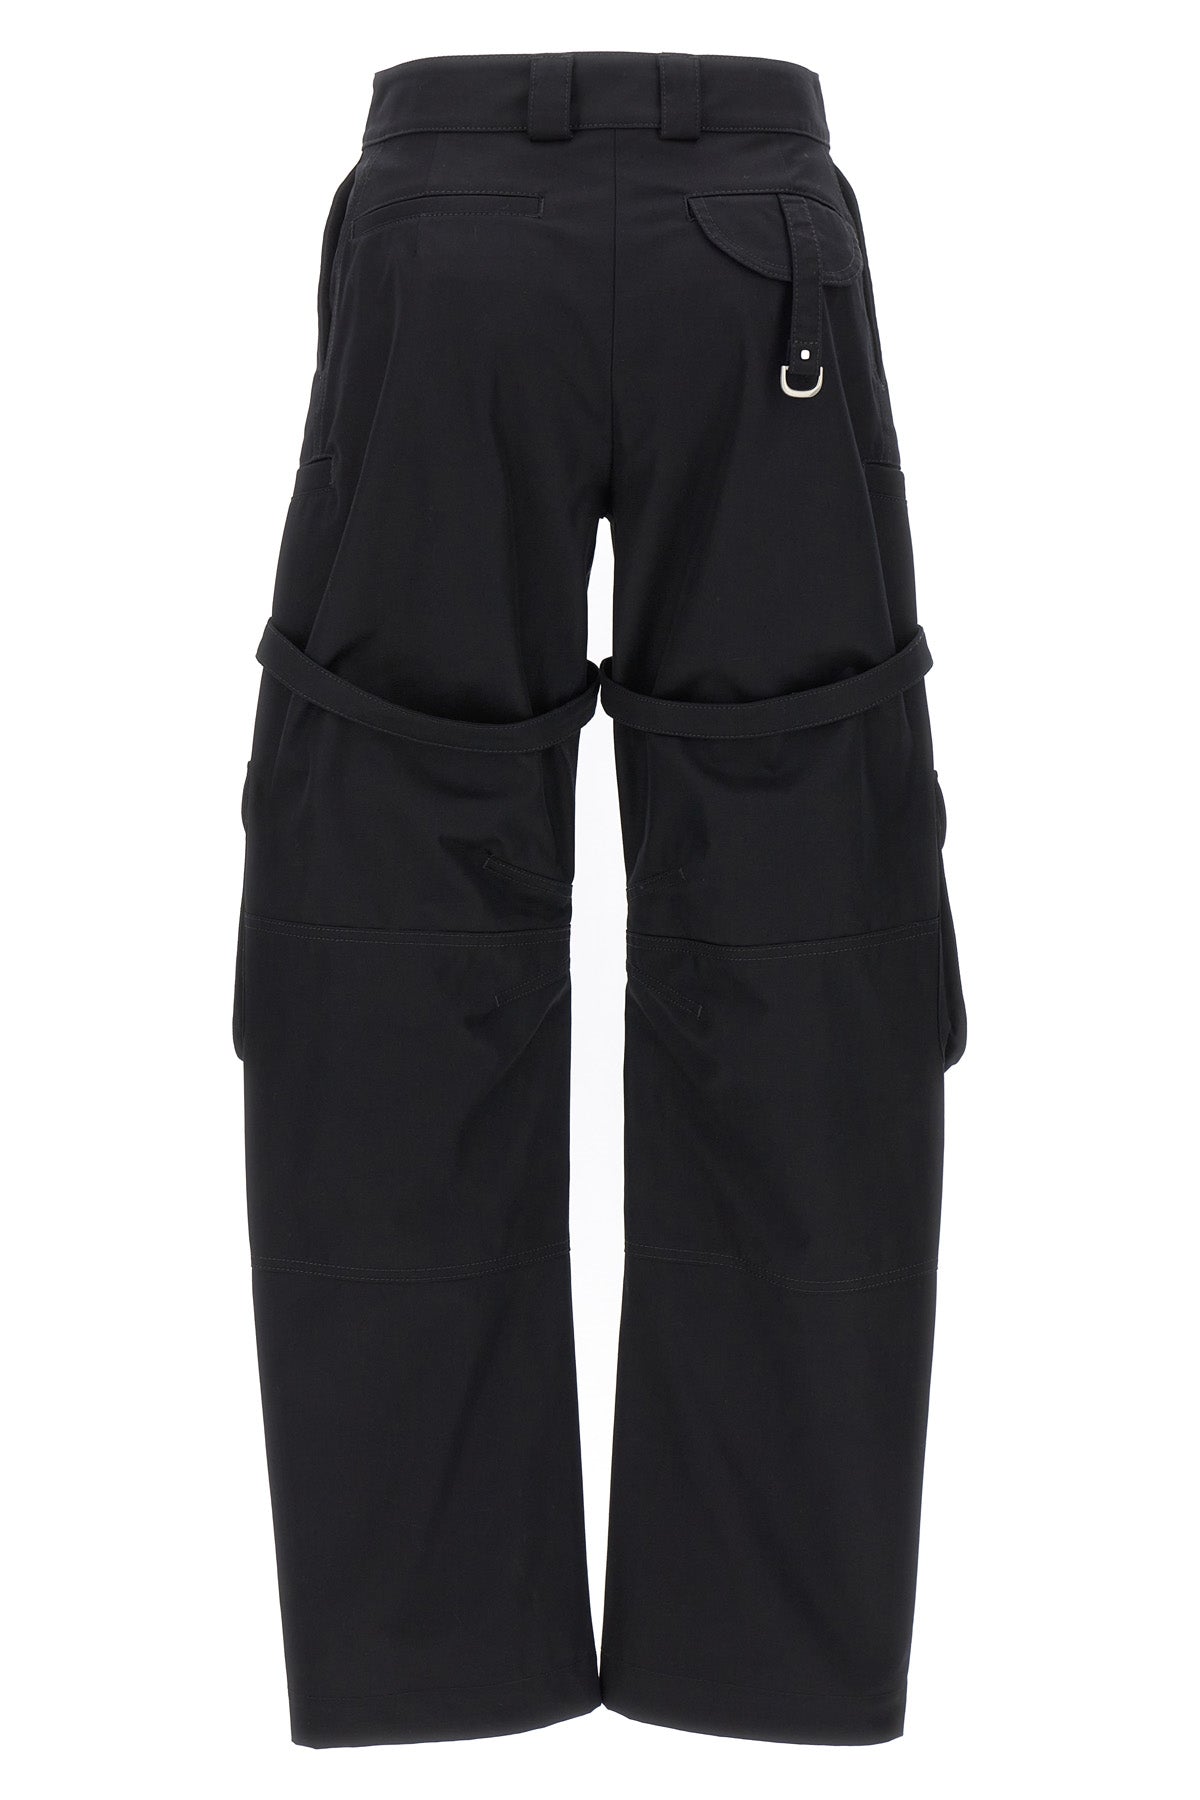 OFF-WHITE 'CO CARGO' PANTS